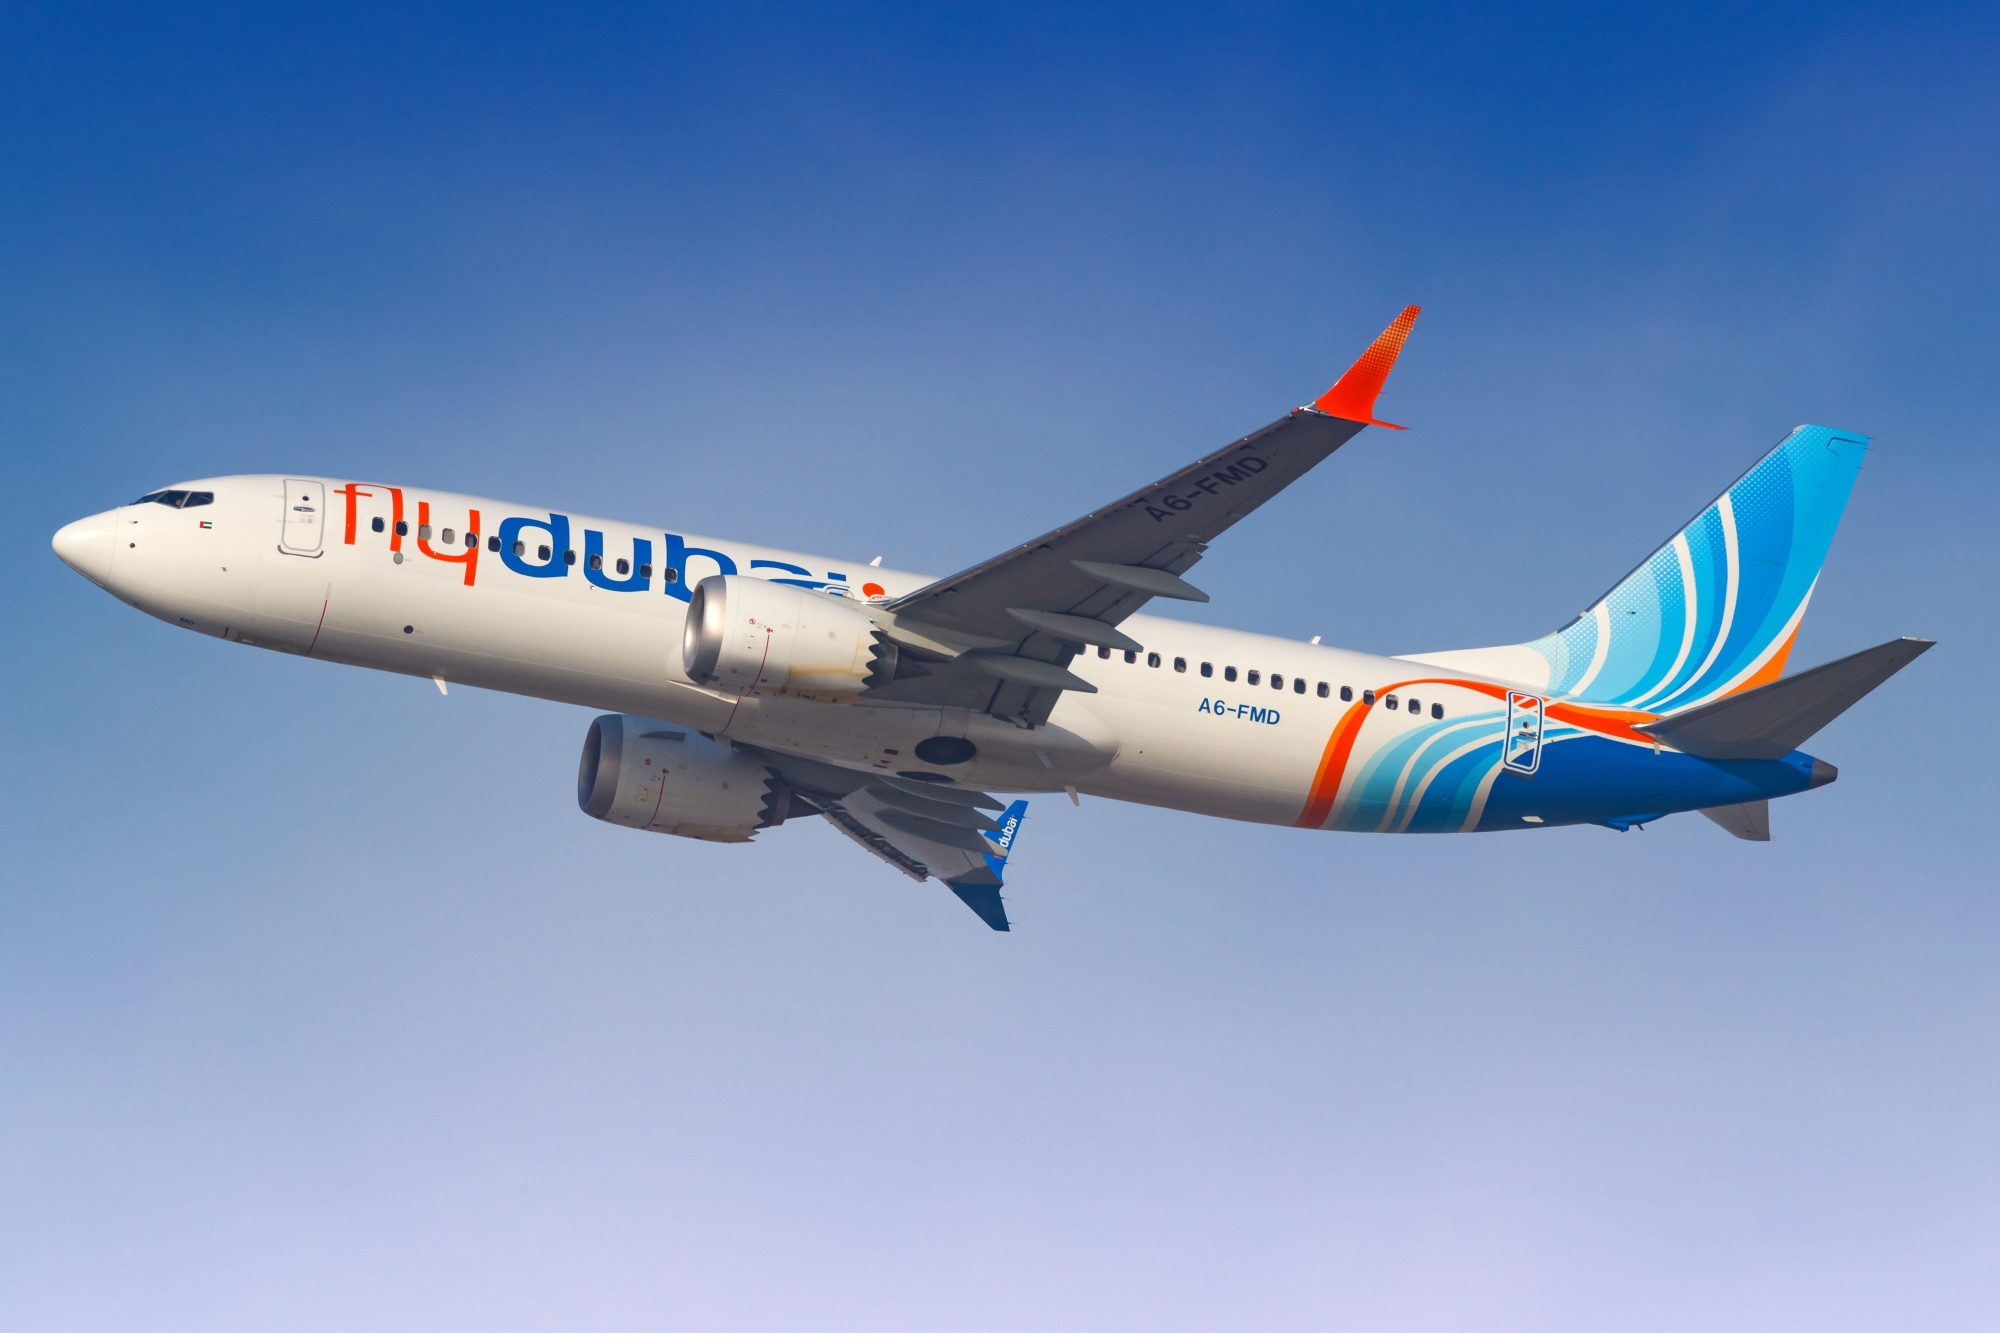 Photo: flydubai flights impacted by temporary closure of regional airspaces